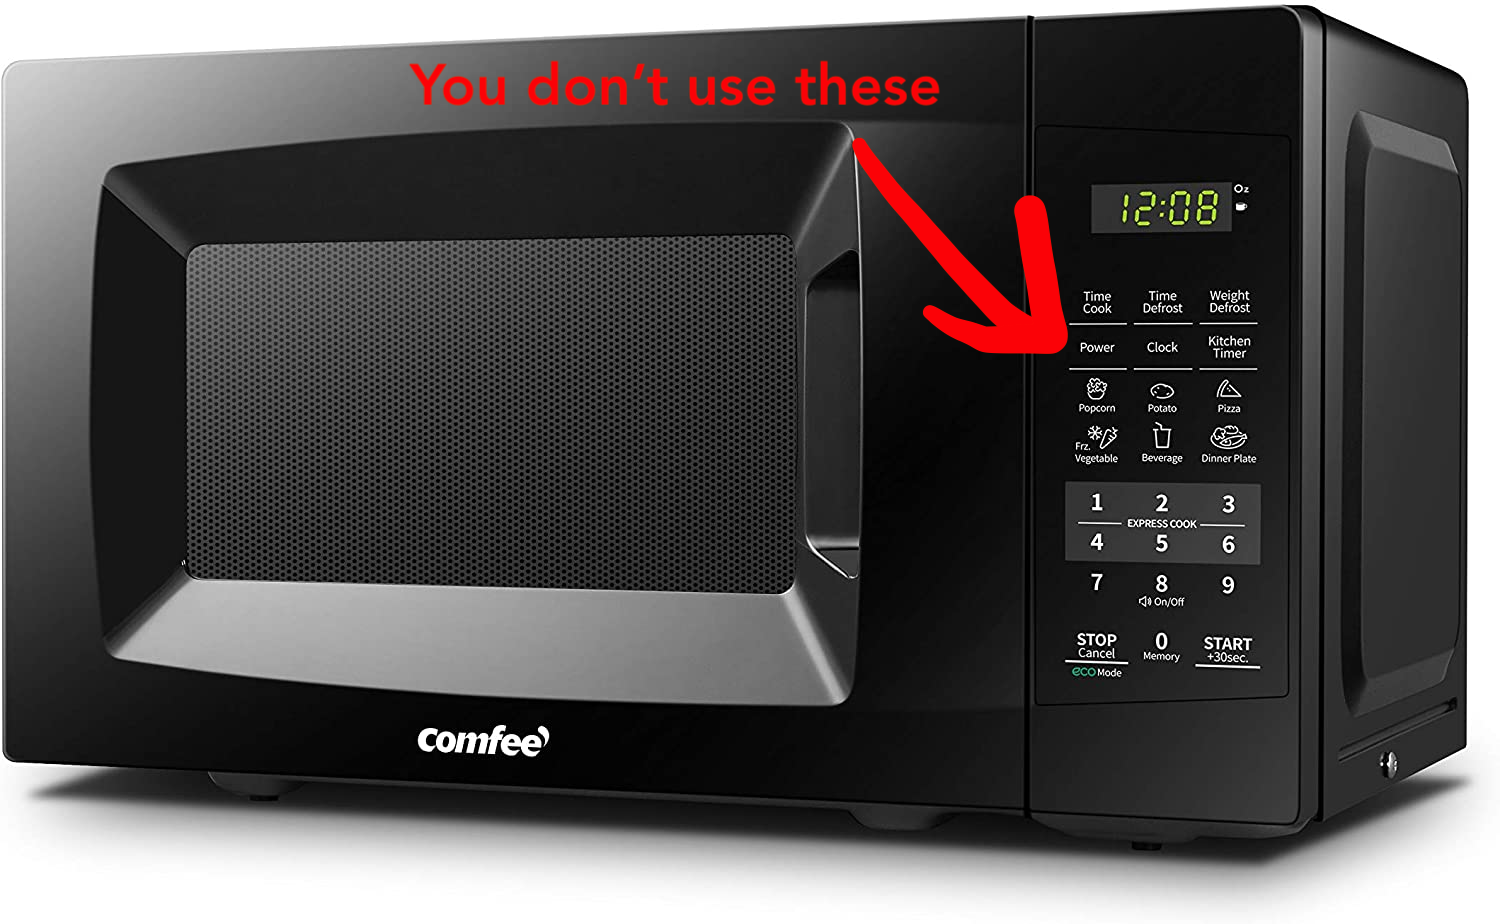 microwave showing unused buttons